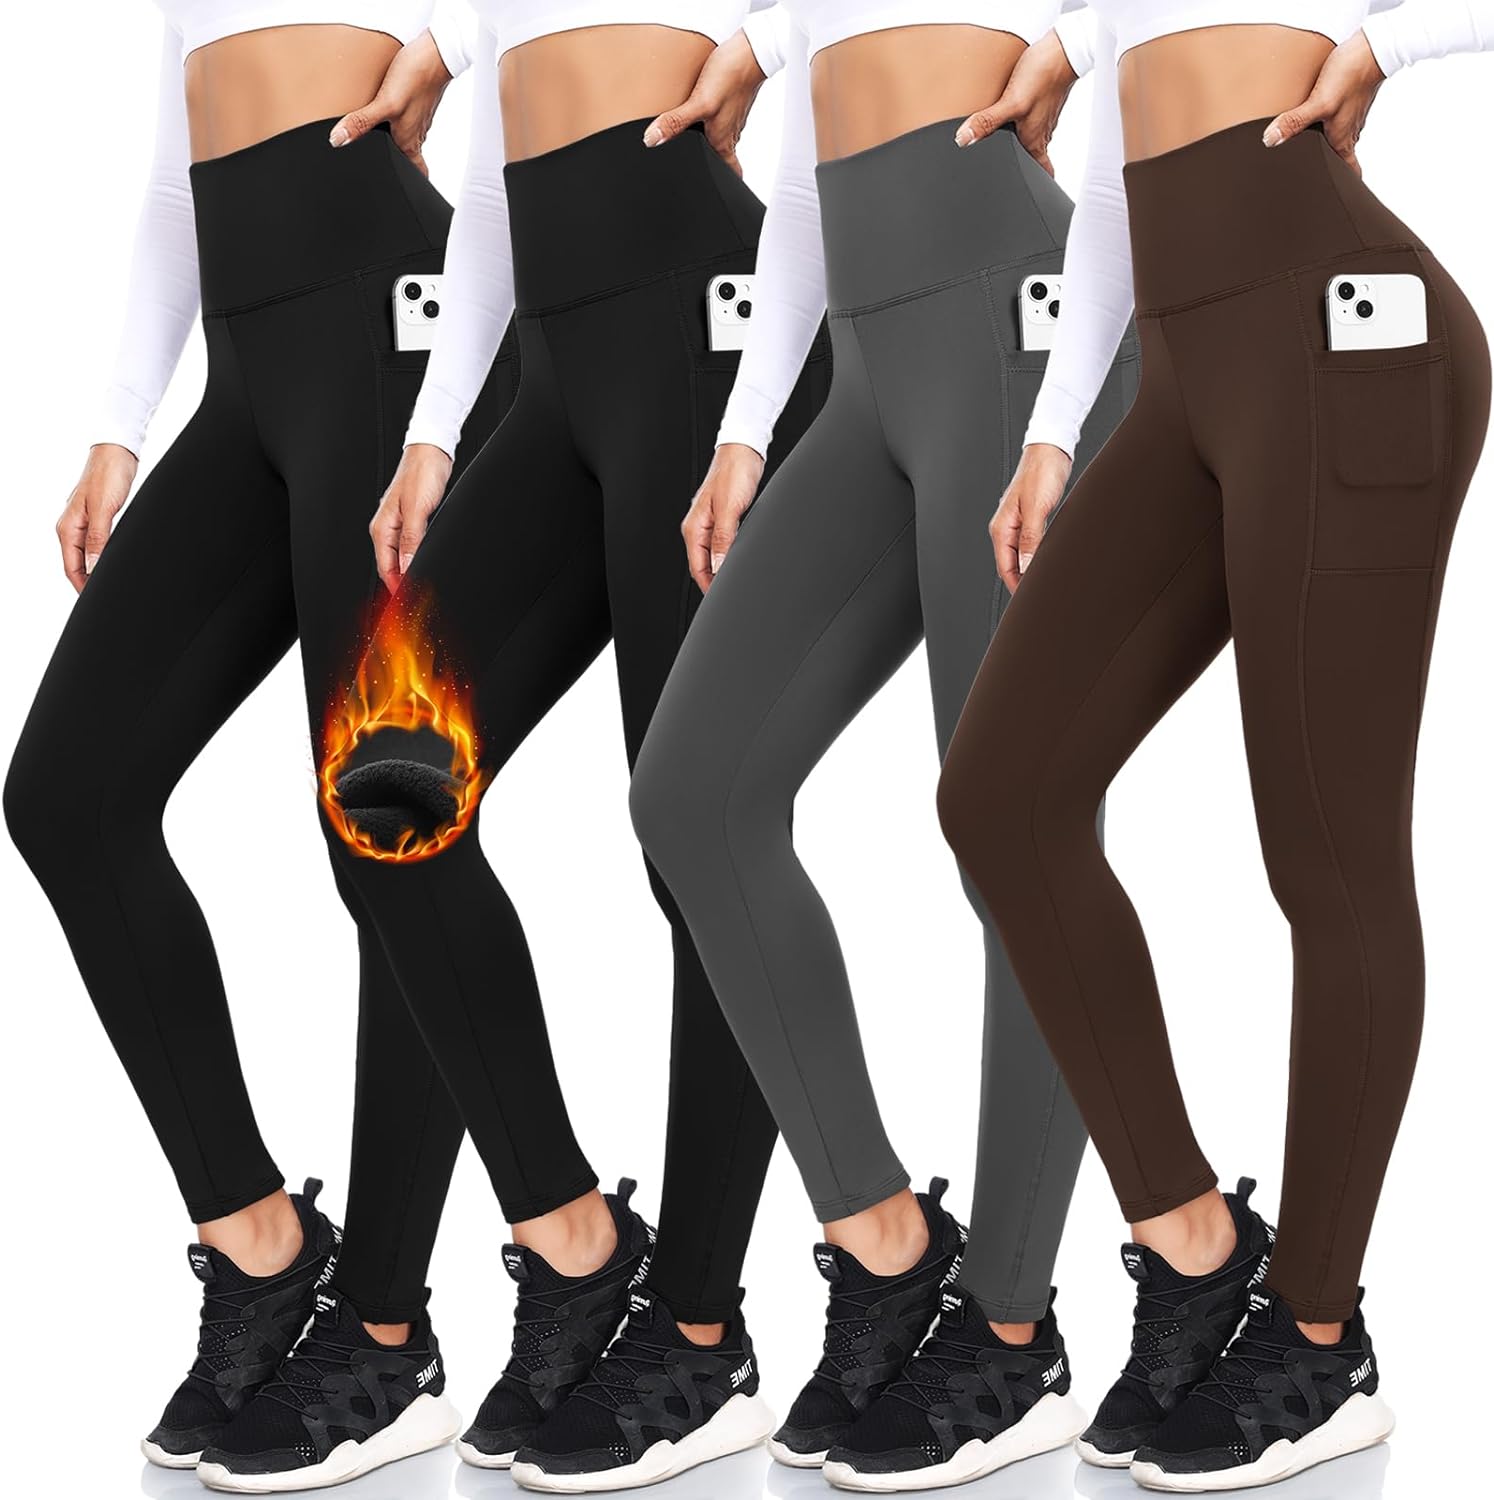 FULLSOFT 4 Pack Fleece Lined Leggings with Pockets for Women High Waisted Thermal Winter Warm Yoga Pants for Workout Running